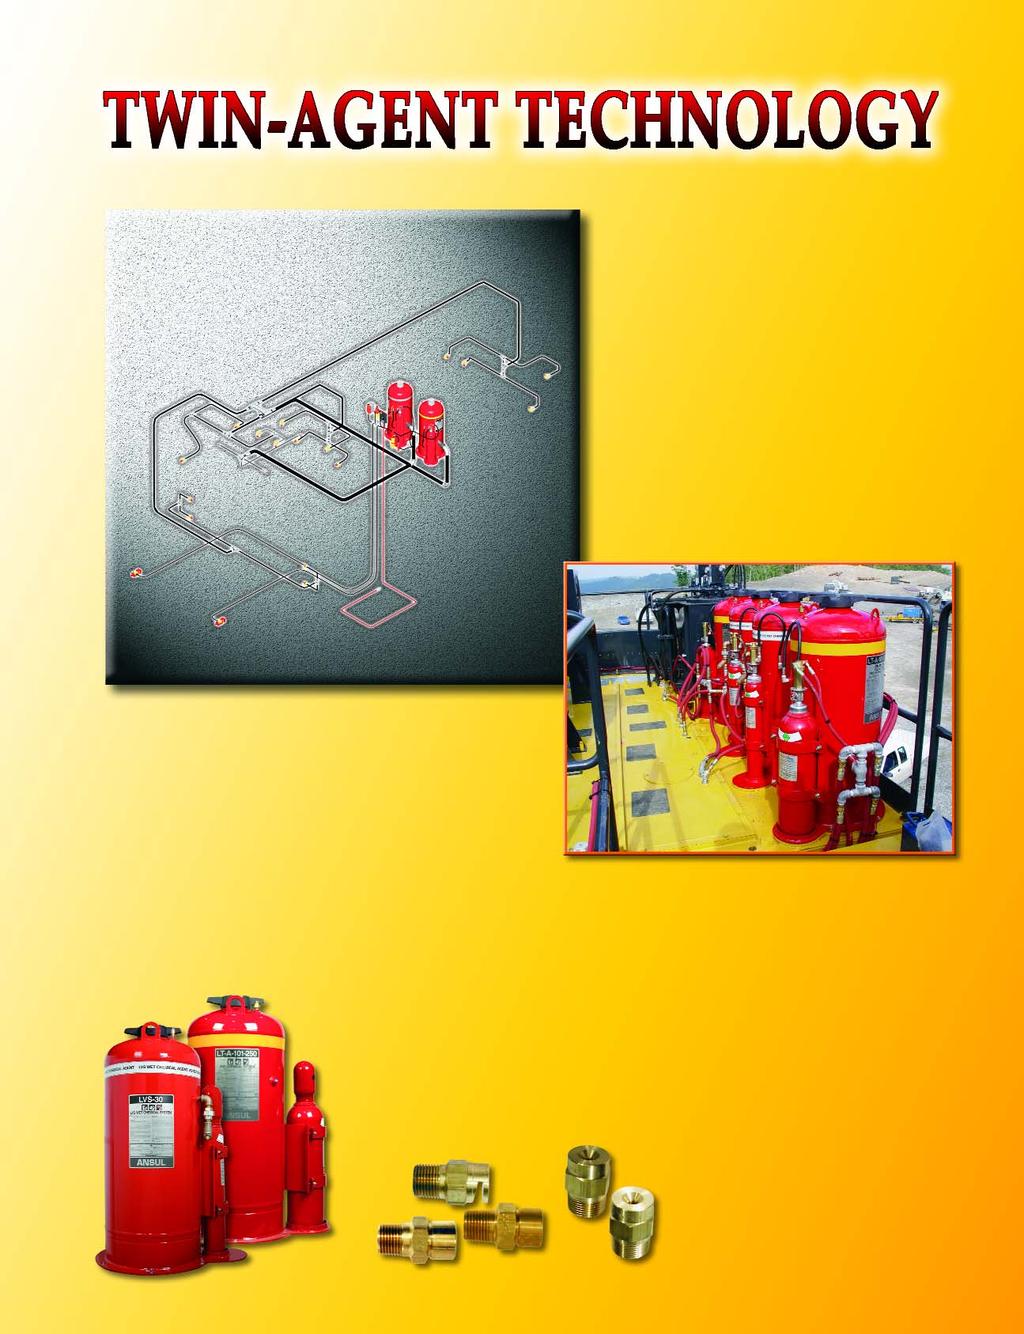 Today s Mega-Class non-road mobile equipment requires MEGA-CLASS fire protection.